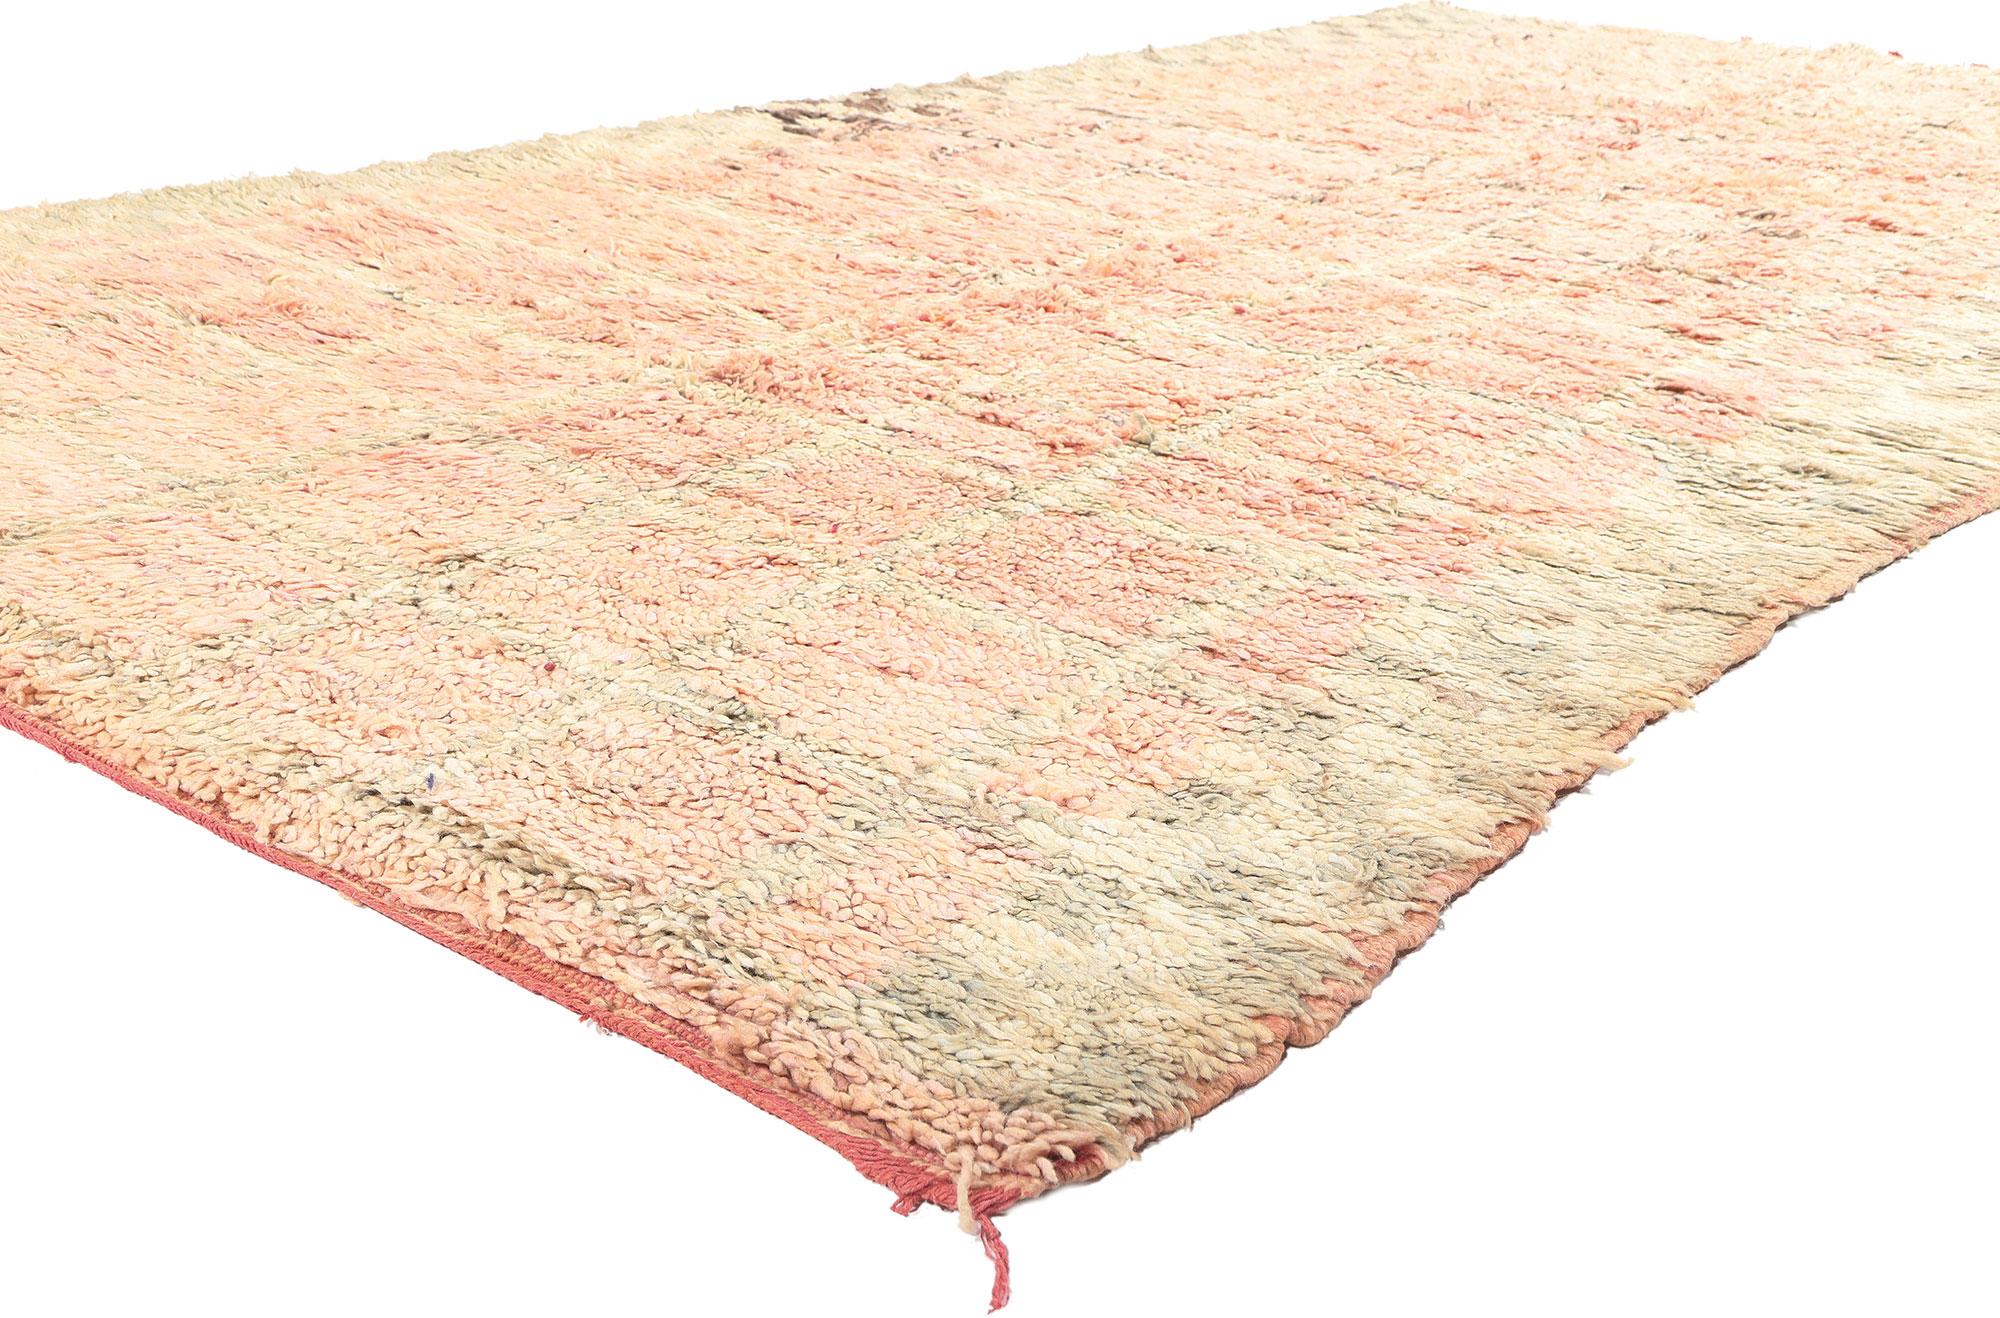 21436 Vintage Pink Boujad Moroccan Rug, 06'00 x 11'00. 

Hailing from the vibrant city of Boujad, celebrated for its eccentric and artistic designs, this vintage Boujad Moroccan rug transcends mere visual appeal. Nestle into the welcoming embrace of